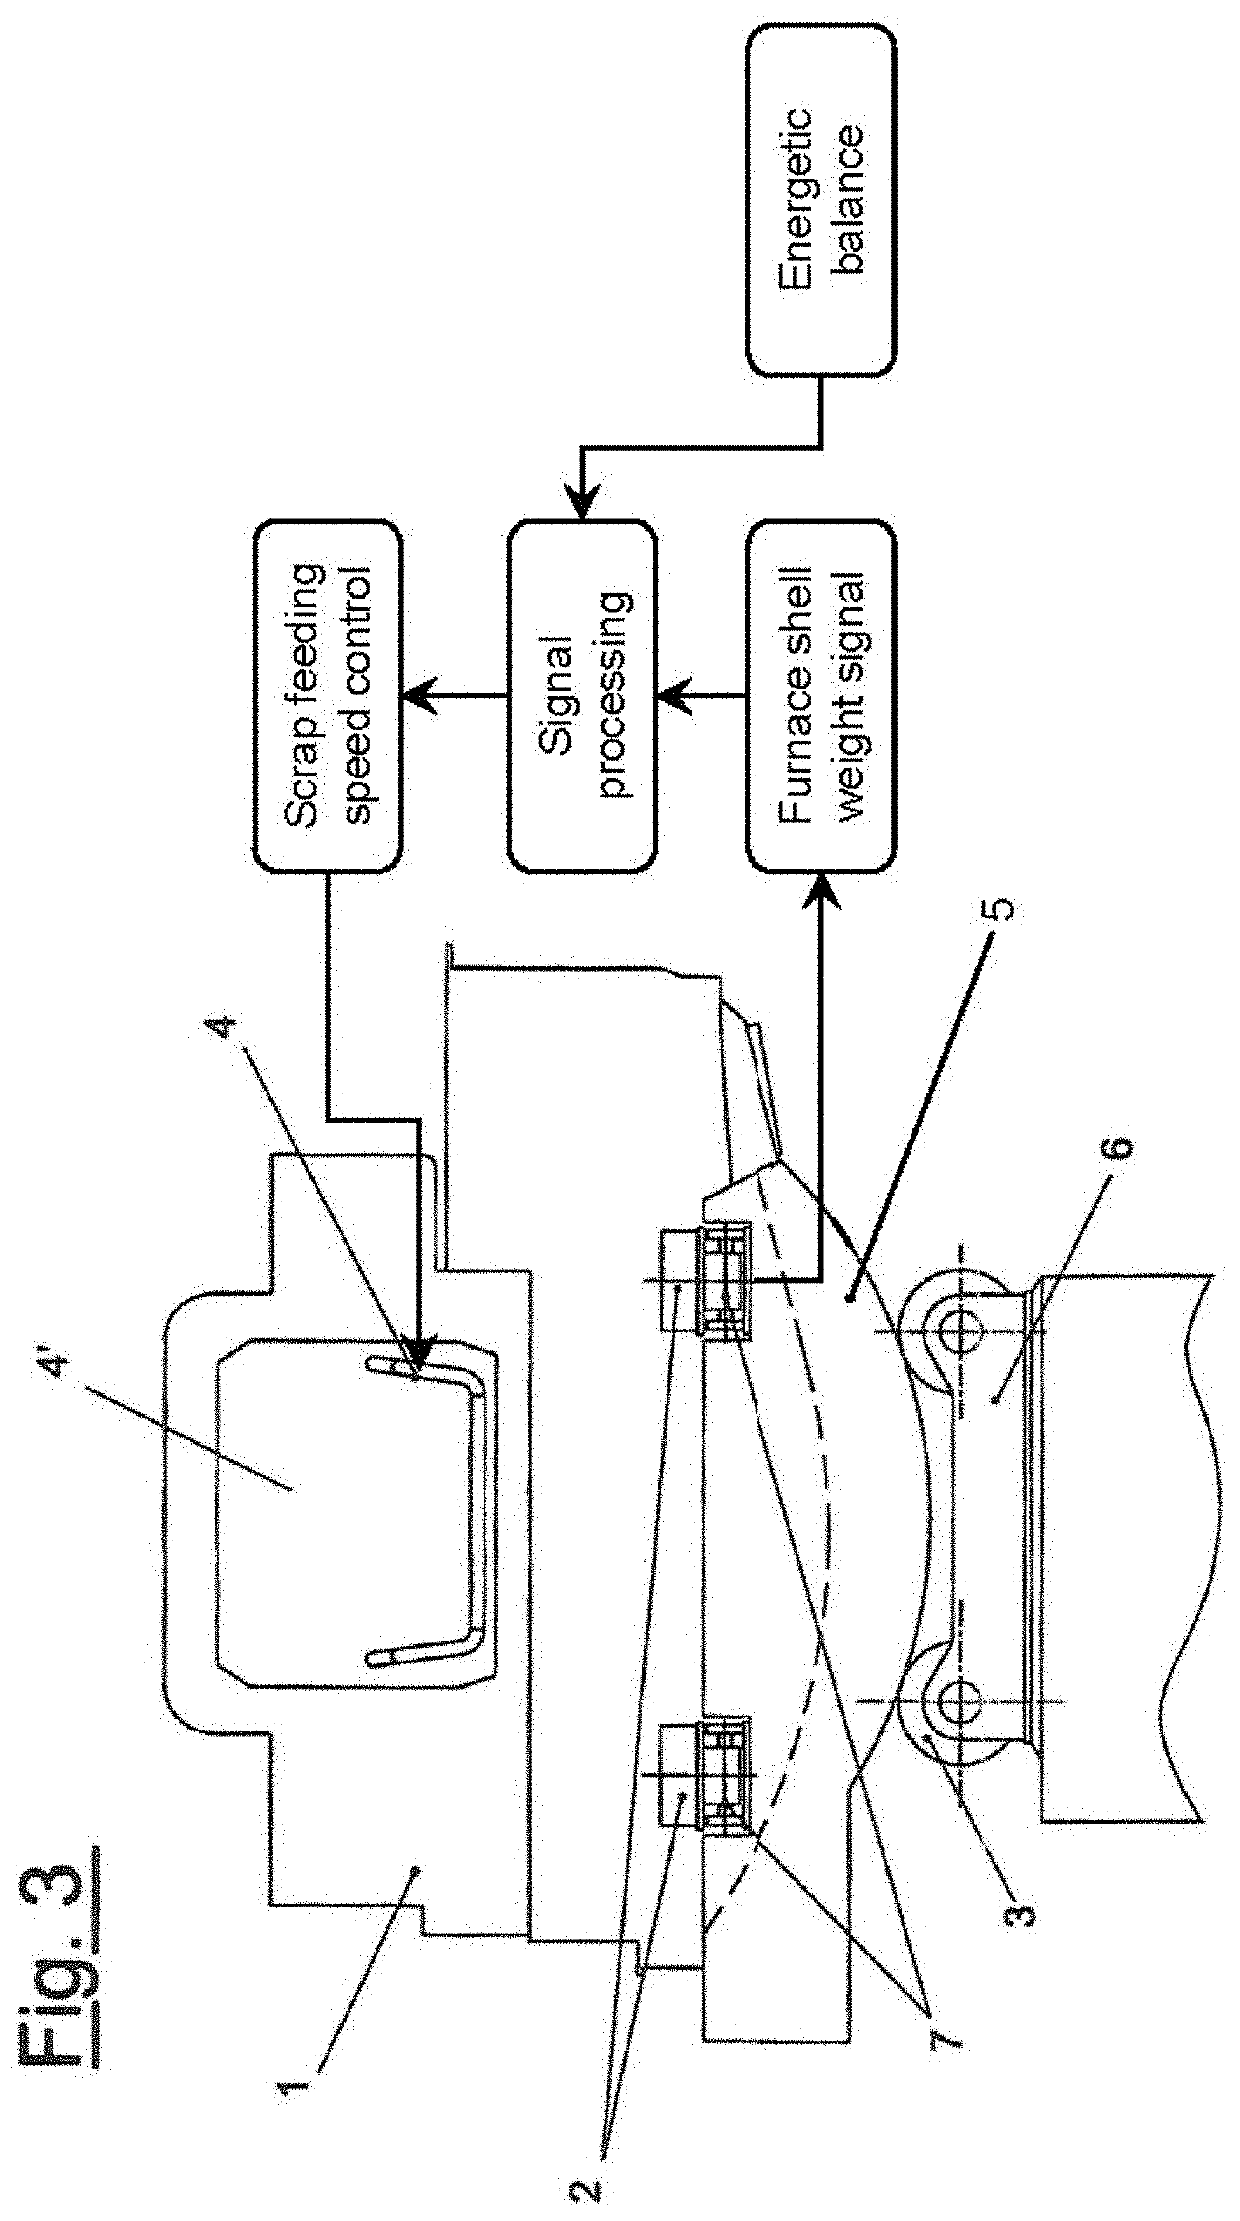 Equipment for measurement and control of load material fed into a furnace